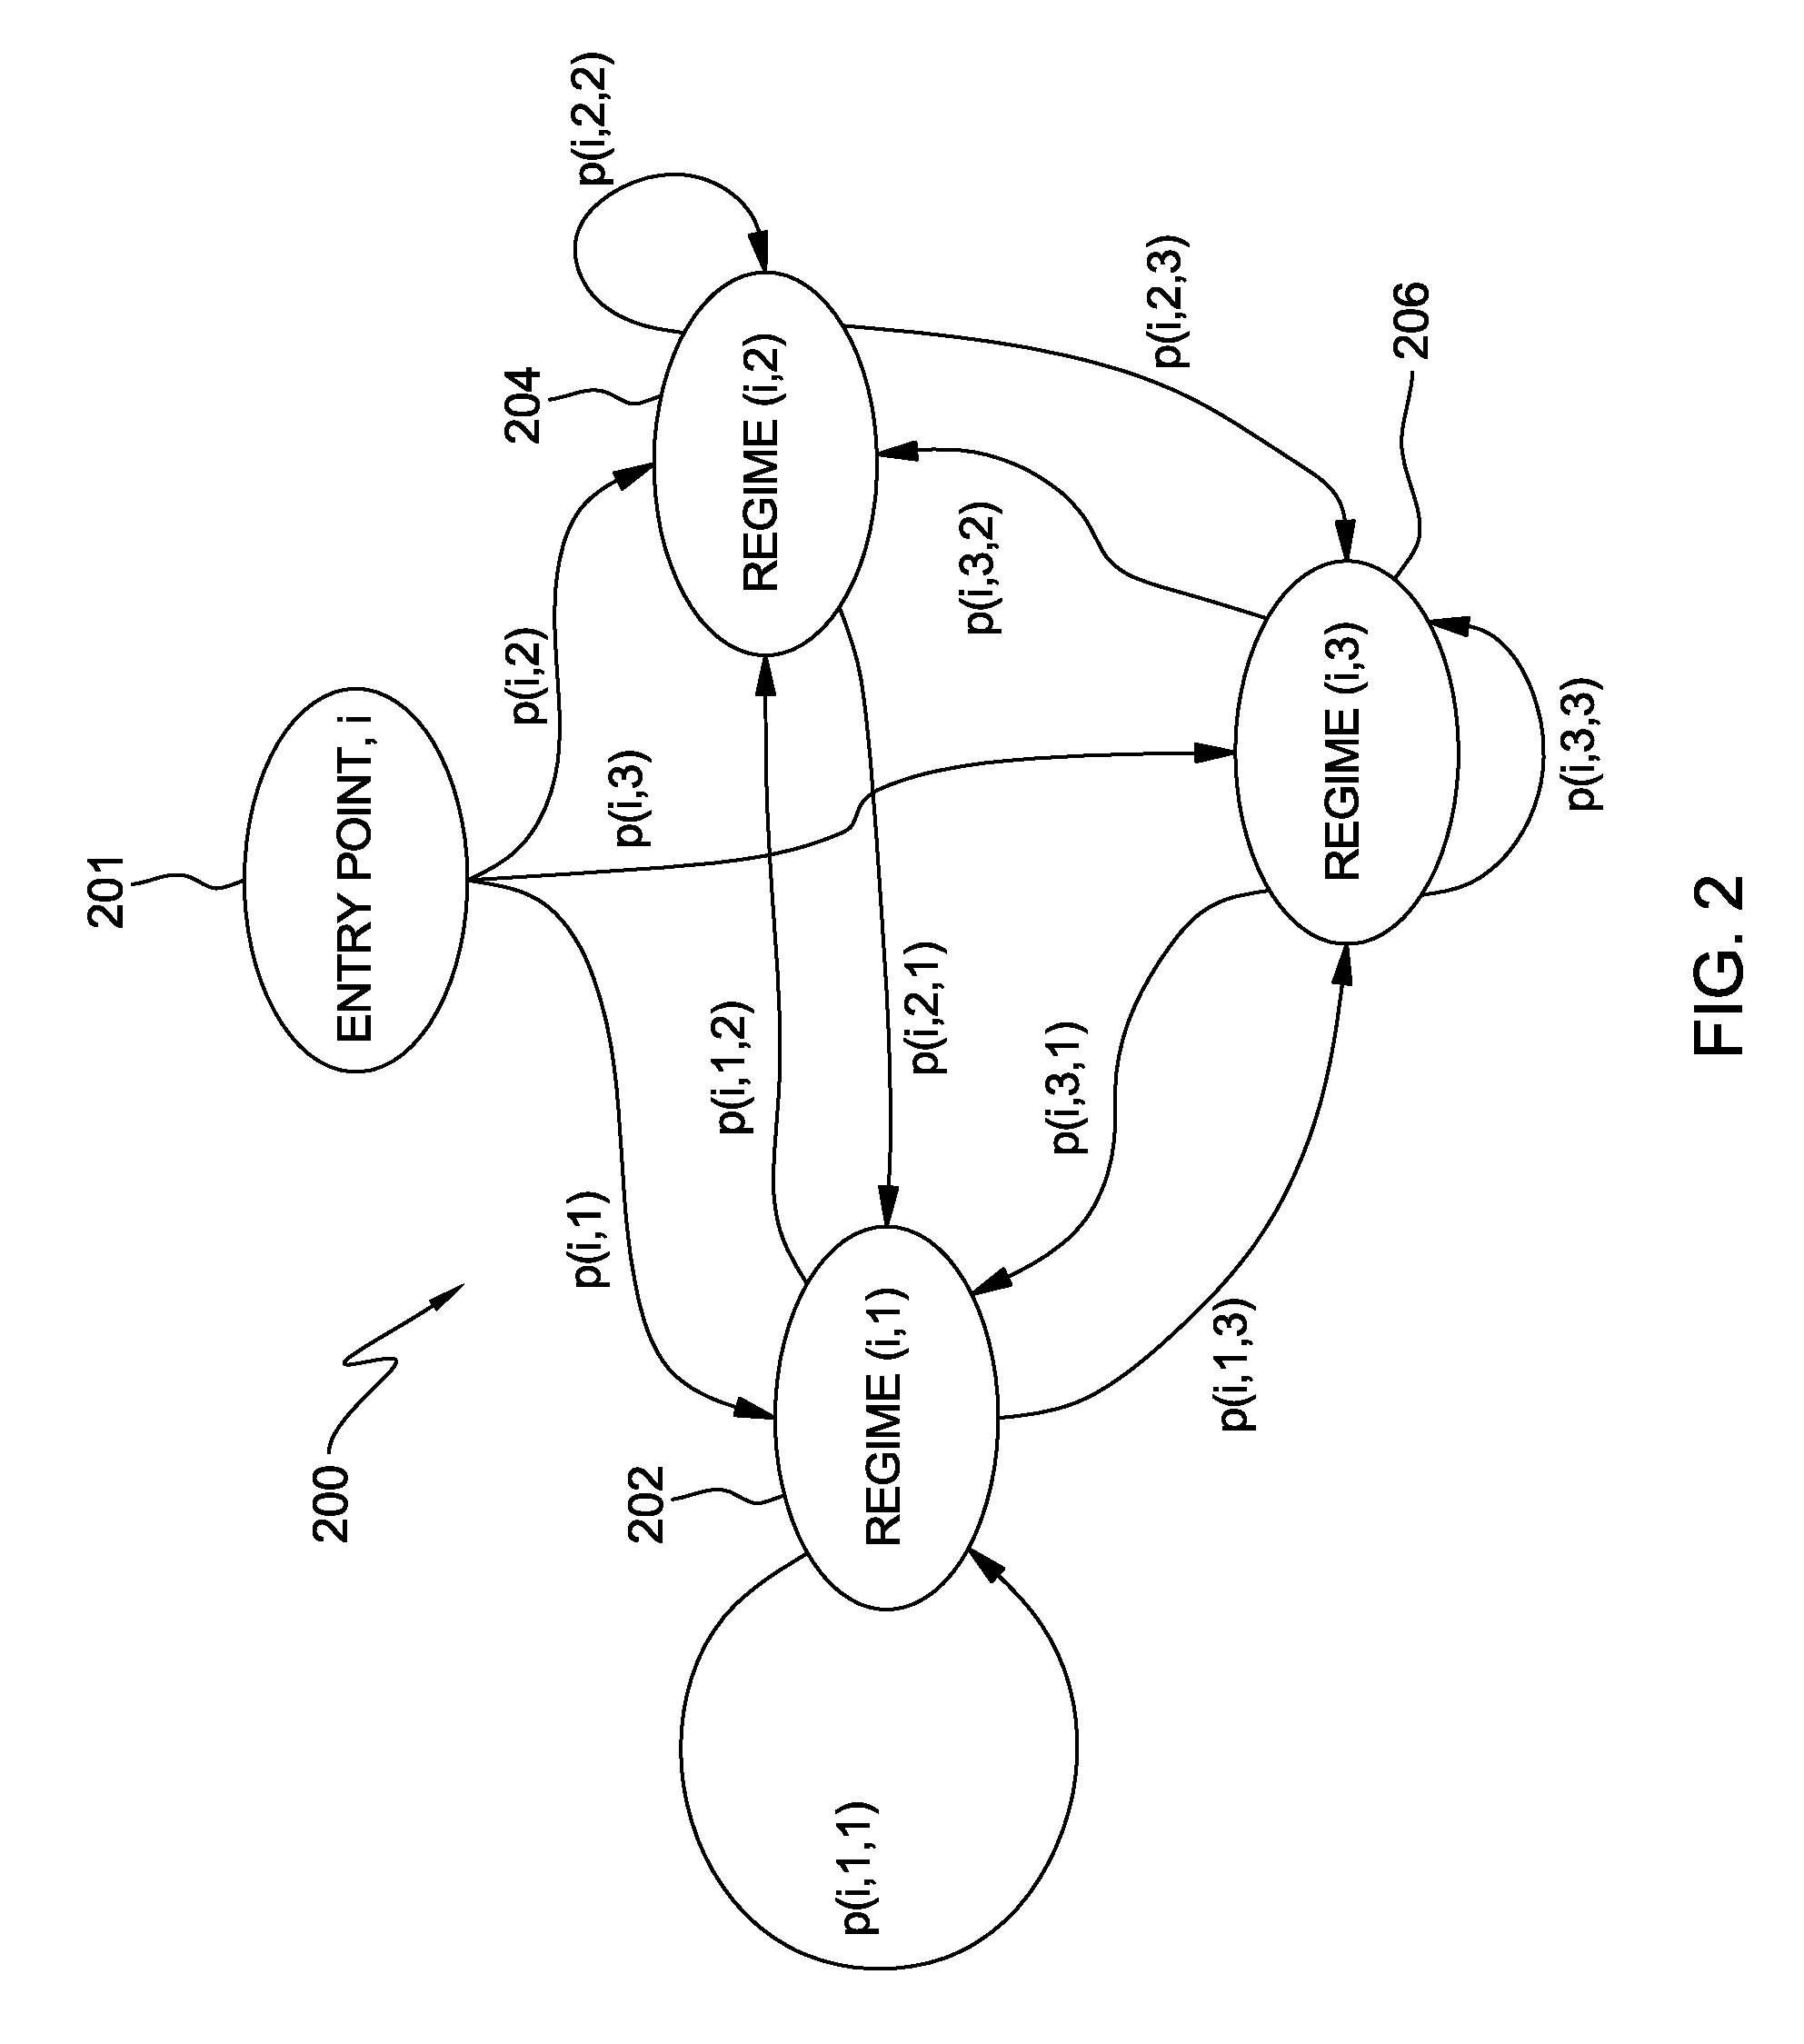 Method and system for intermediate to long-term forecasting of electric prices and energy demand for integrated supply-side energy planning